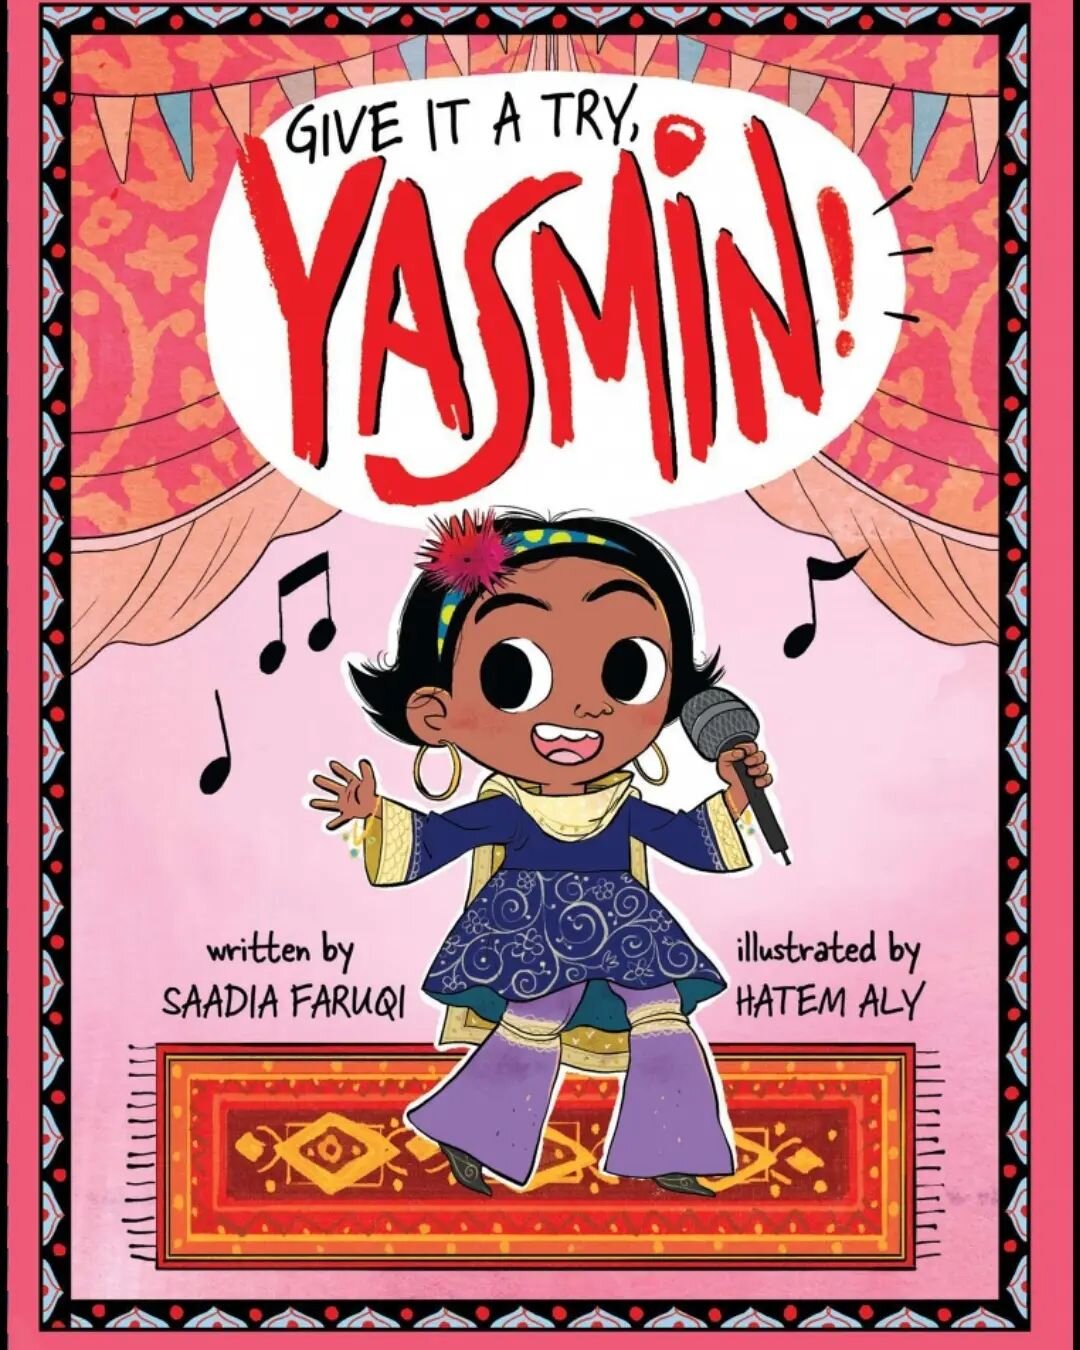 Our wonderful wonderful library is still in shipping containers ,making its way from Stockholm to Banjul.
In the meantime we read alot from Kindle where we find old friends and new.
Today the kids  read #Yasmin by @saadiafaruqi
And @metahatem .
It's 